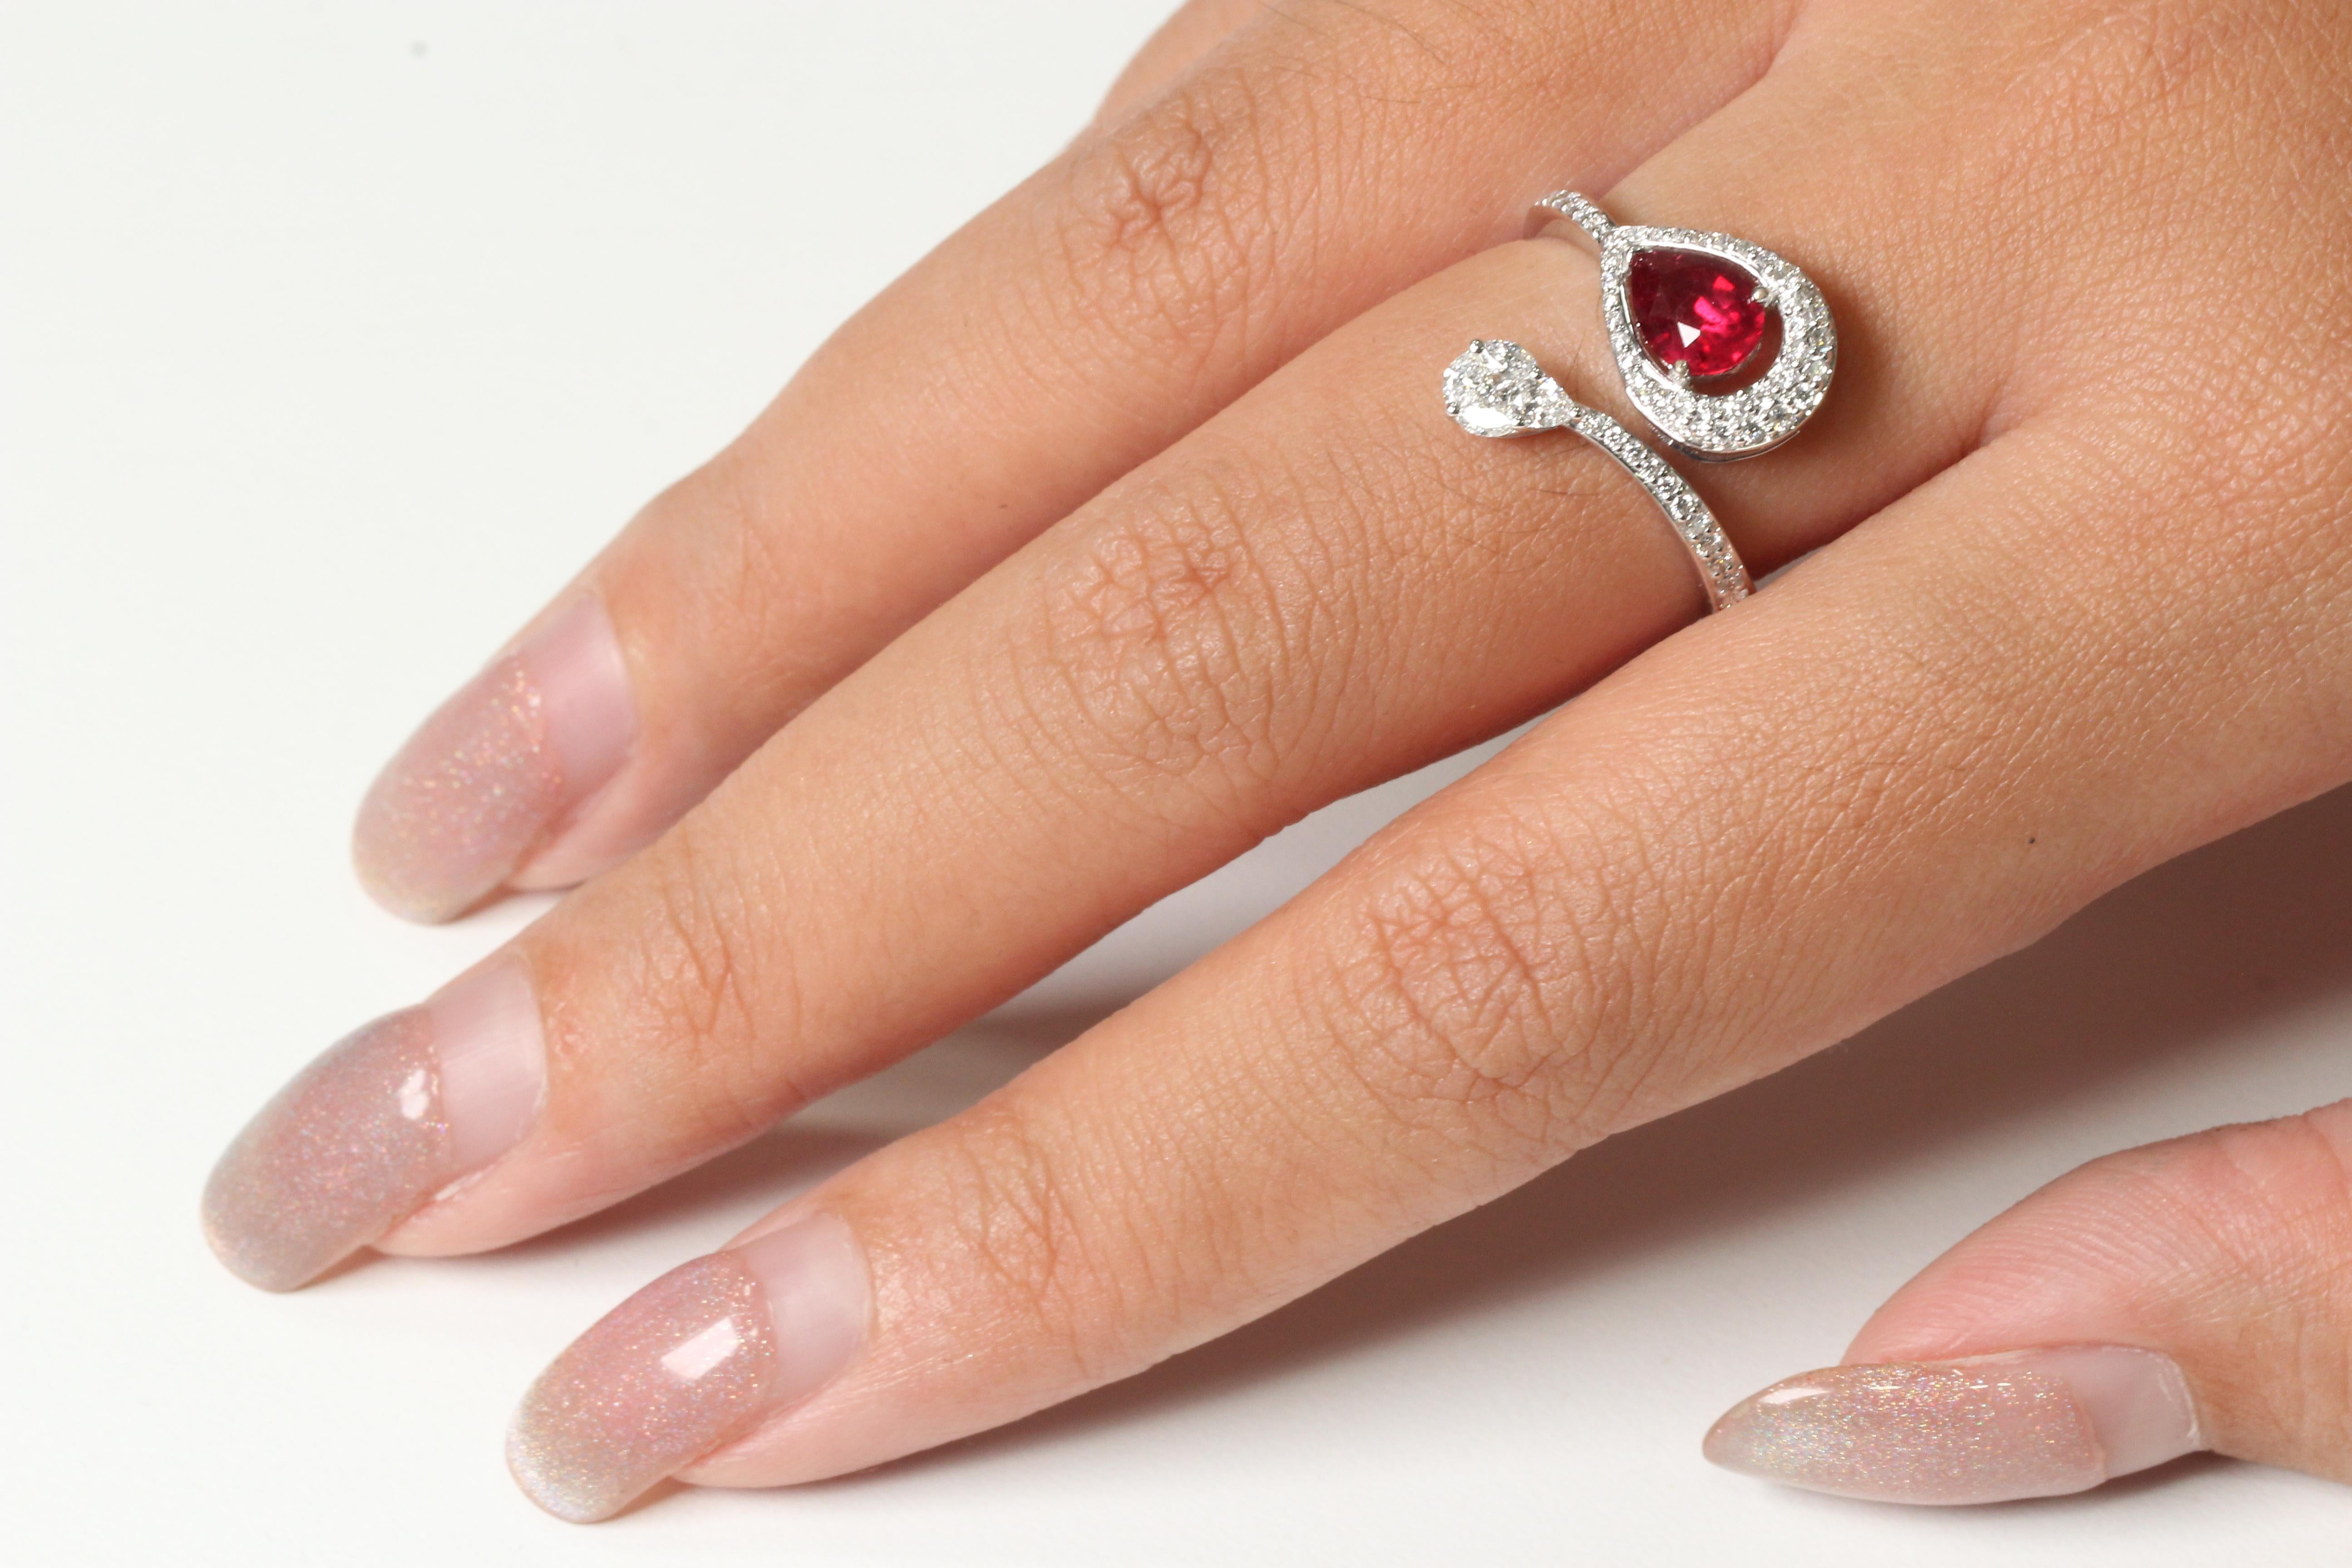 With this ring, you can be sure to grab everyone's attention. This piece is made up of a glass filled ruby stone and diamond stones in an antique style setting. The combination of these materials and the design of this ring make it stand out from